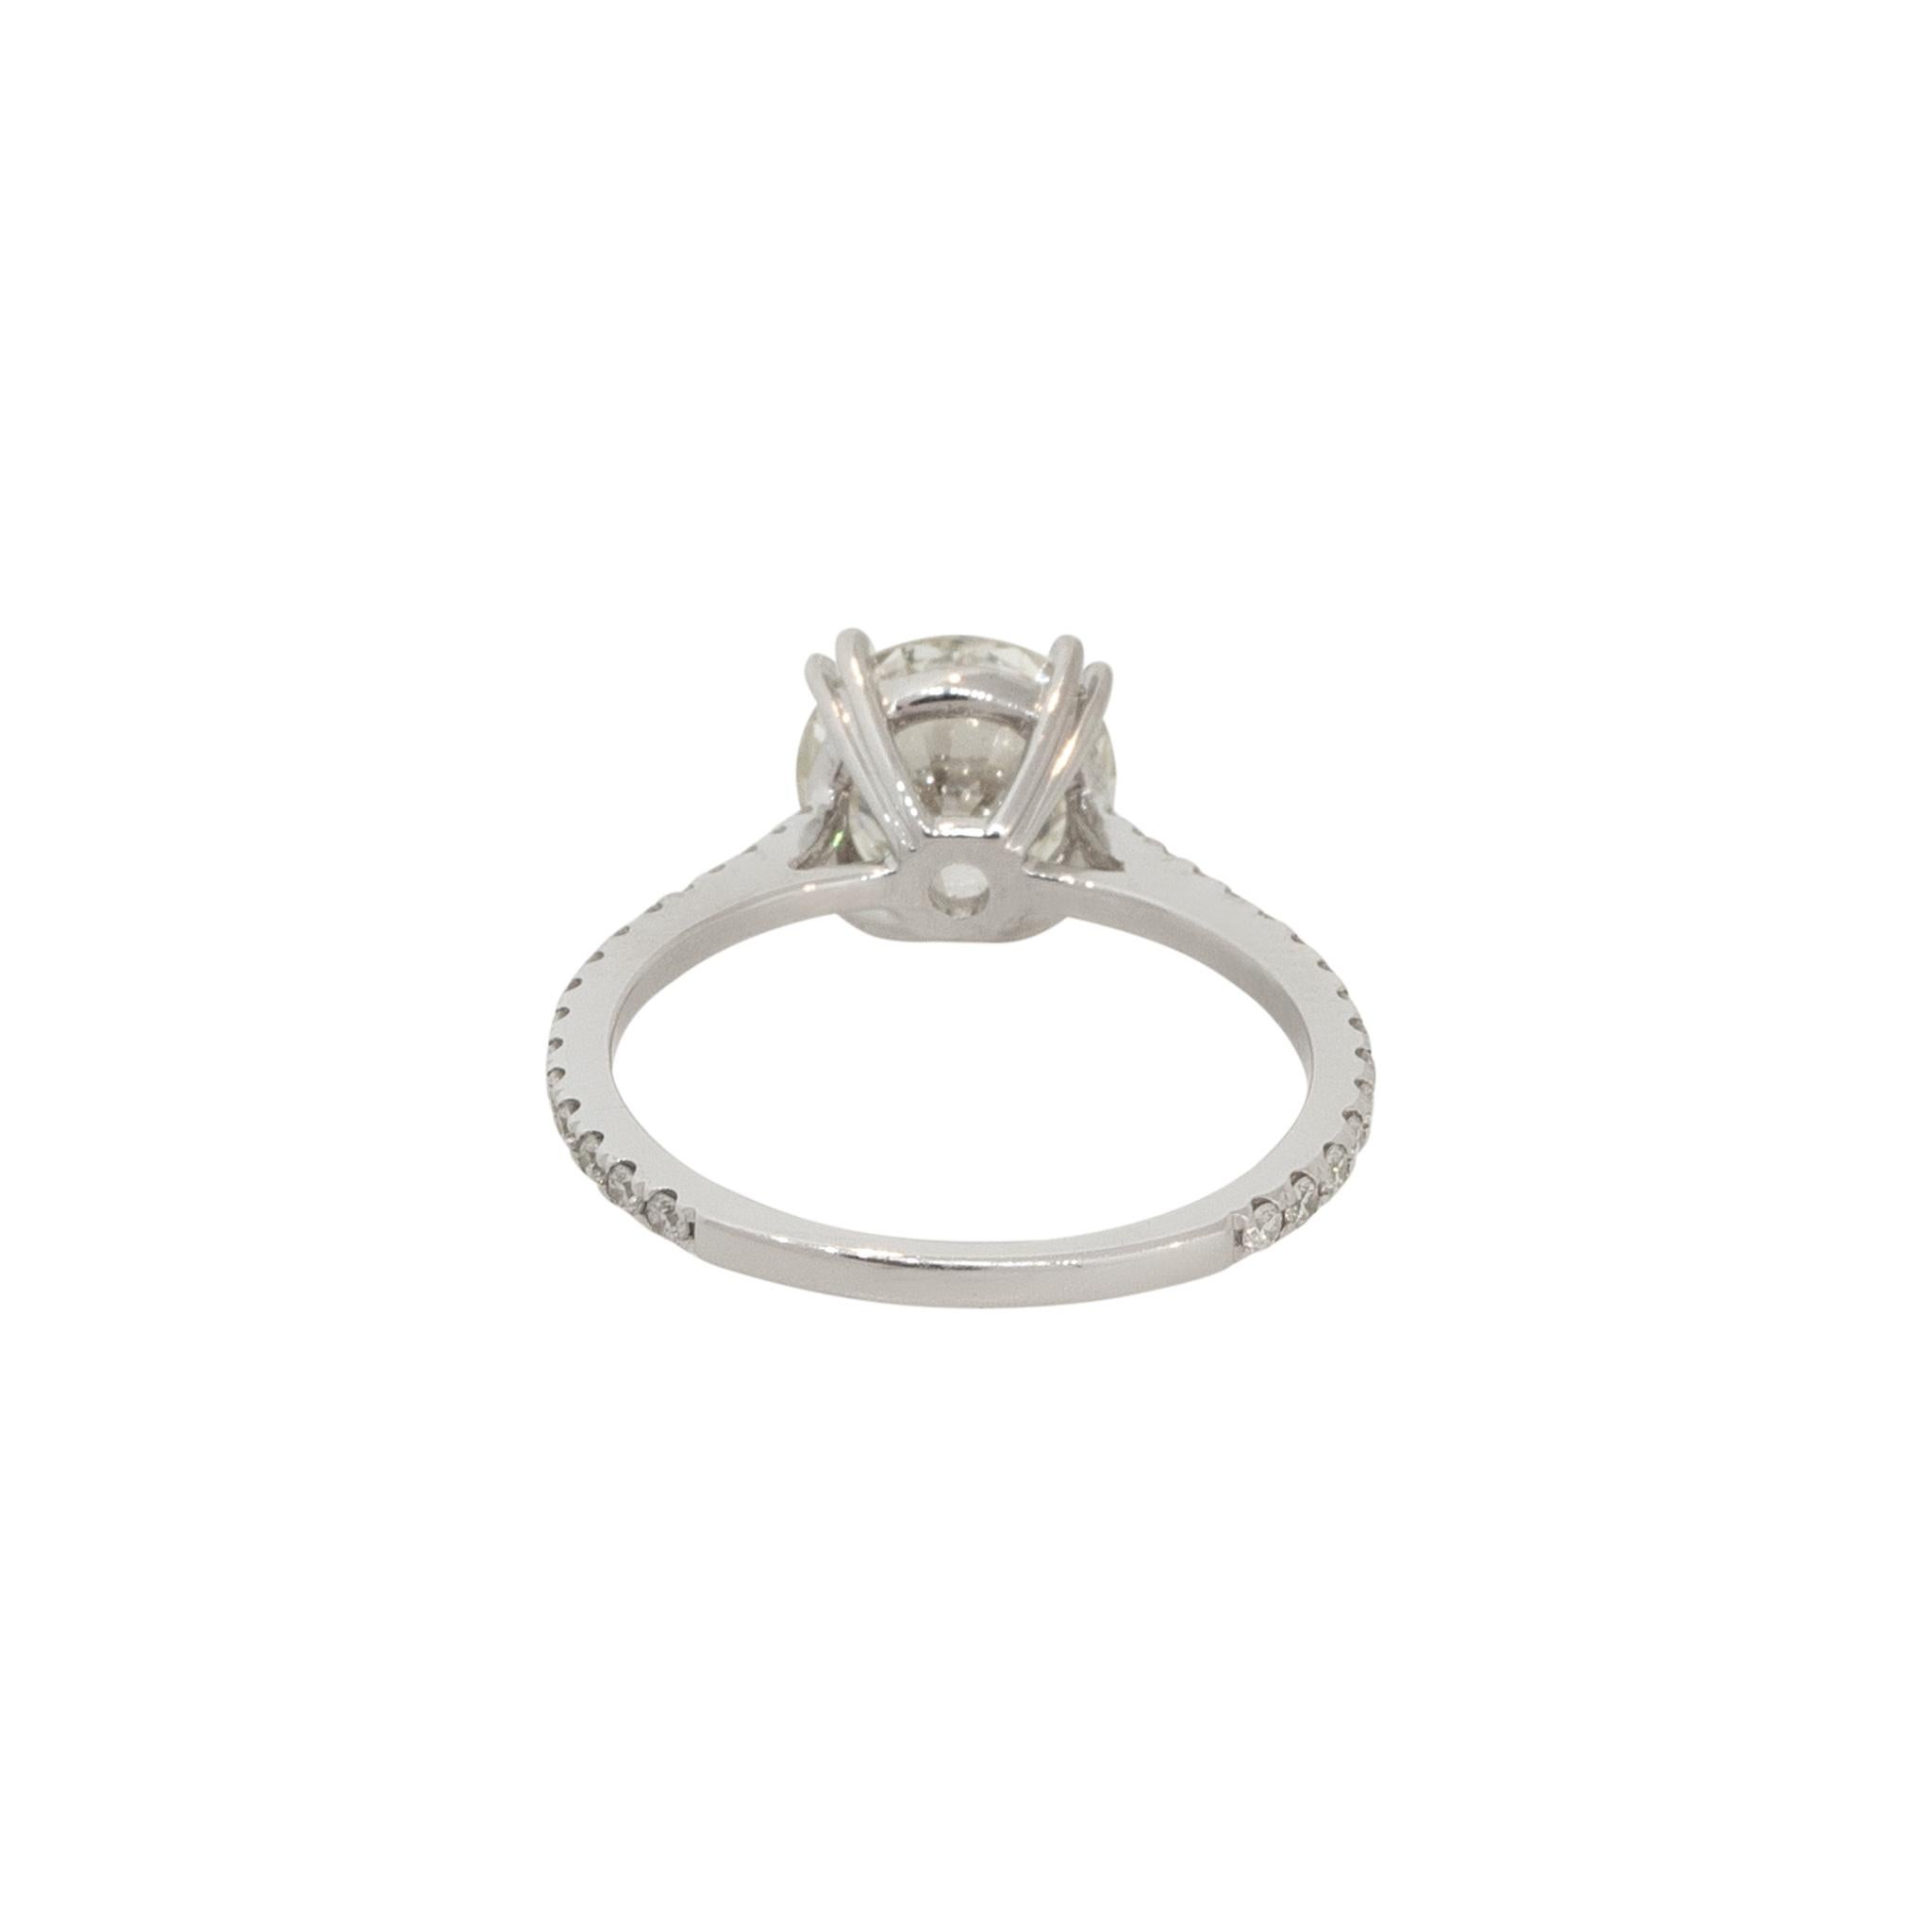 18k White Gold 2.17ctw Round Brilliant Diamond Engagement Ring

Material: 18k White gold
Center Diamond Details: 1.84ct round brilliant EGL graded Diamond. Diamond is L in color and VS1 in clarity. EGL Report # us61844702d
Adjacent Diamond Details: